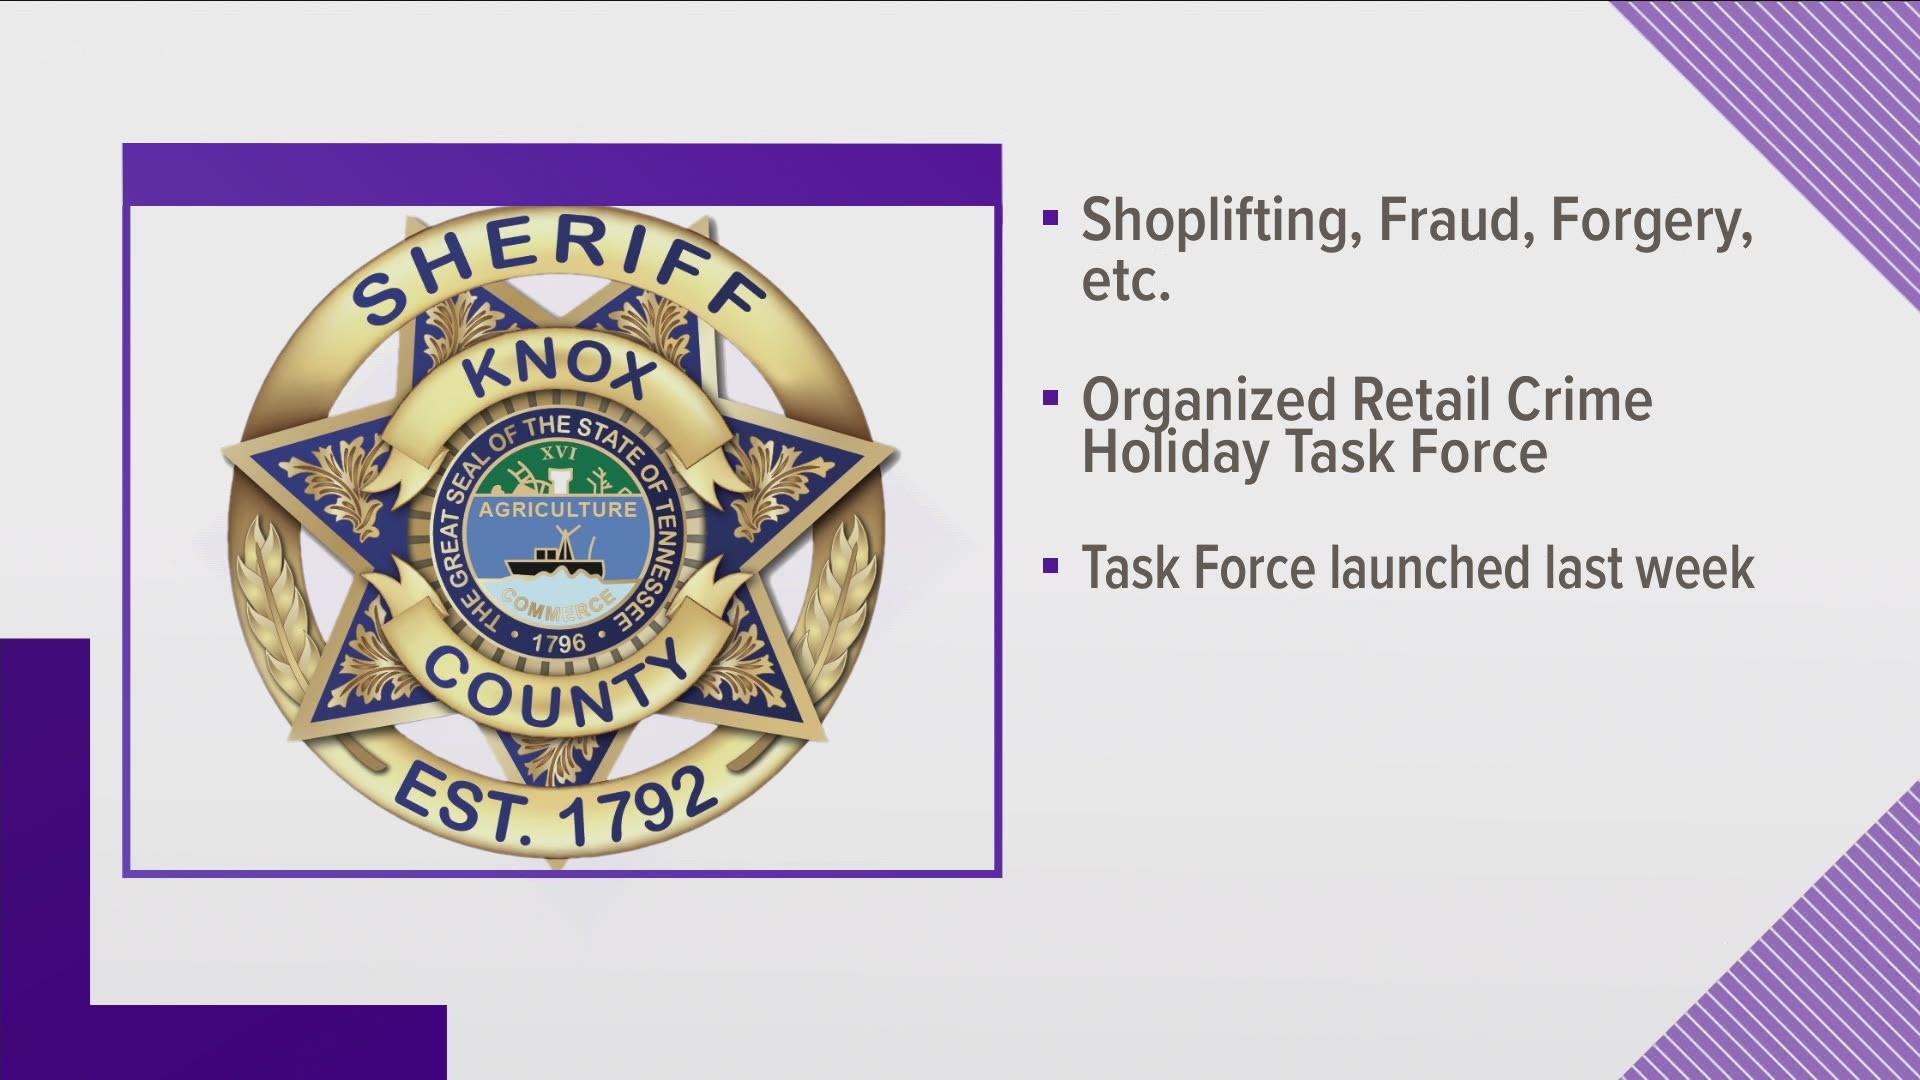 The Knox County Sheriff's Office says its arrested 114 people for shoplifting, credit card fraud, check forgery, identity theft and more.